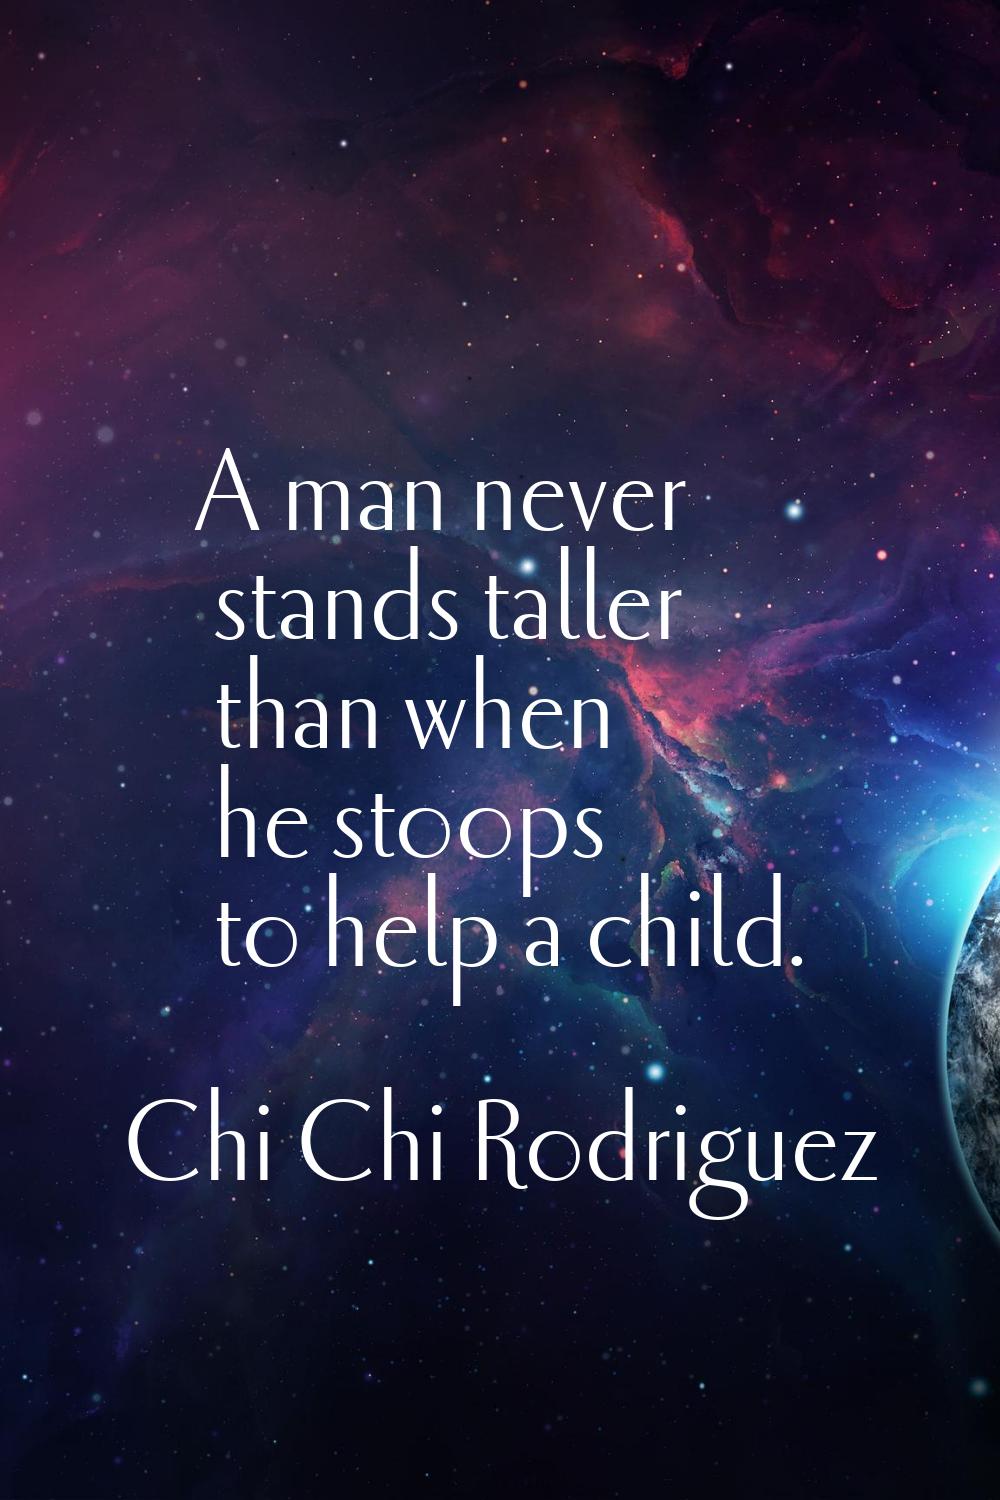 A man never stands taller than when he stoops to help a child.